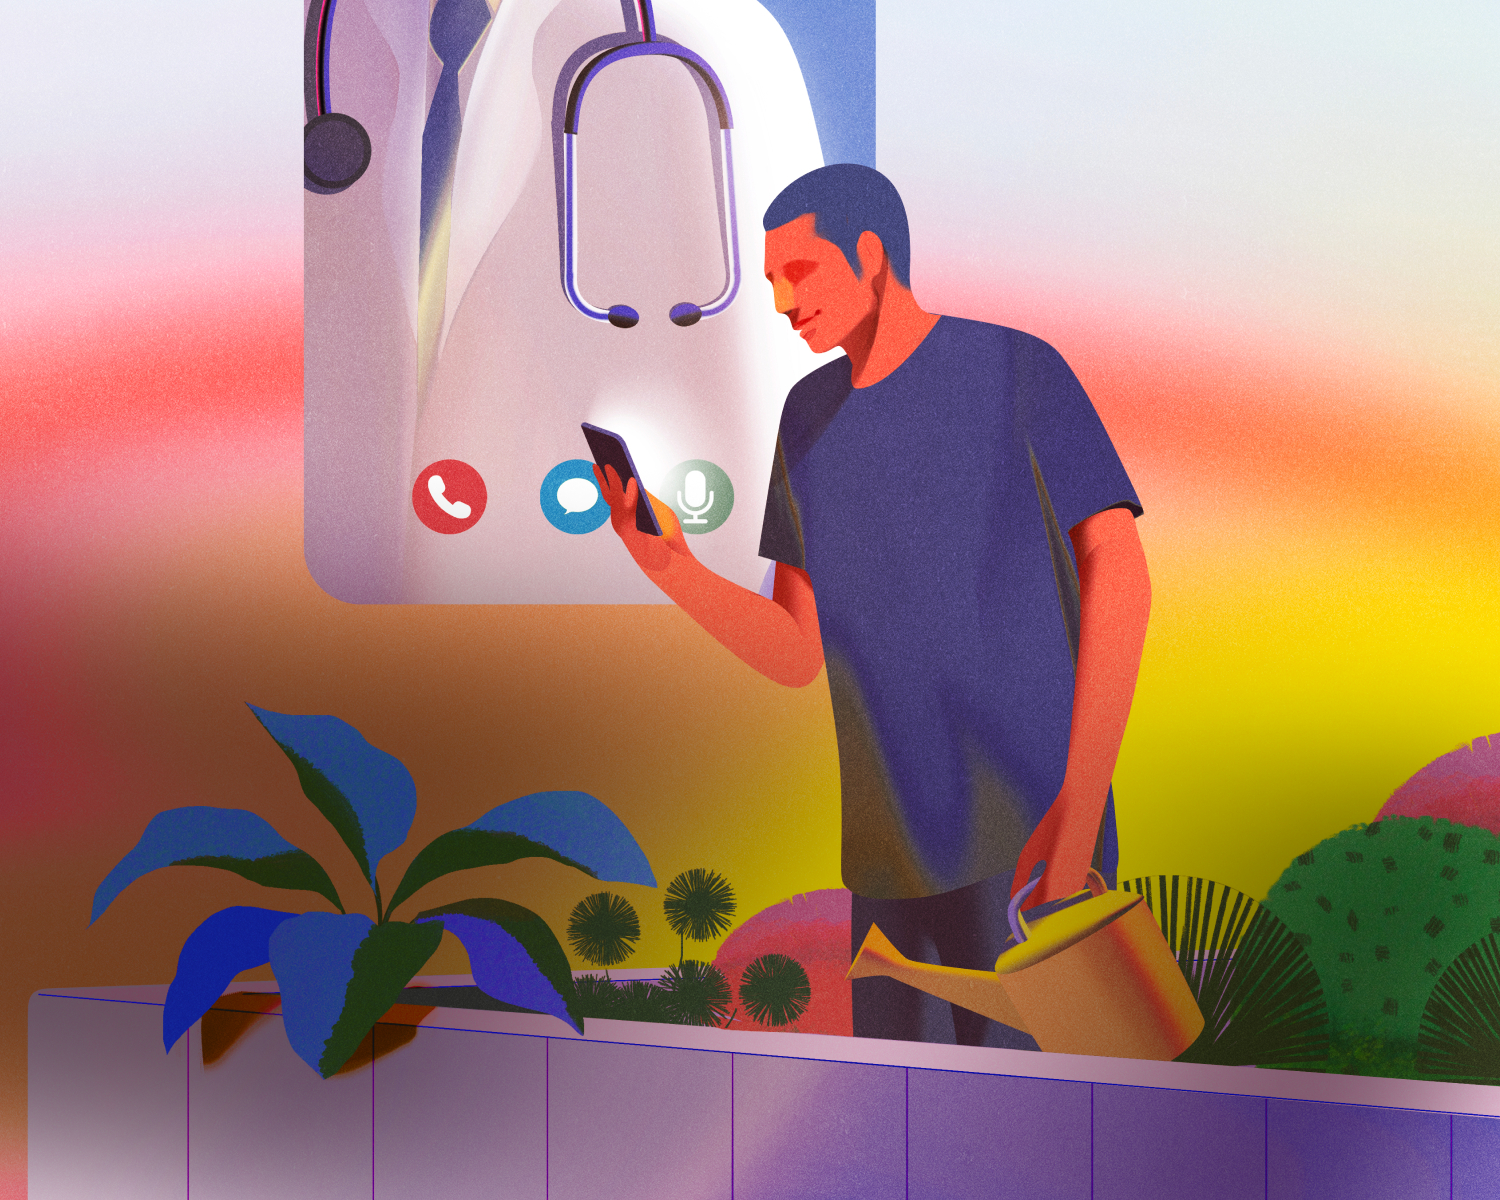 Illustration of a man on phone talking to doctor